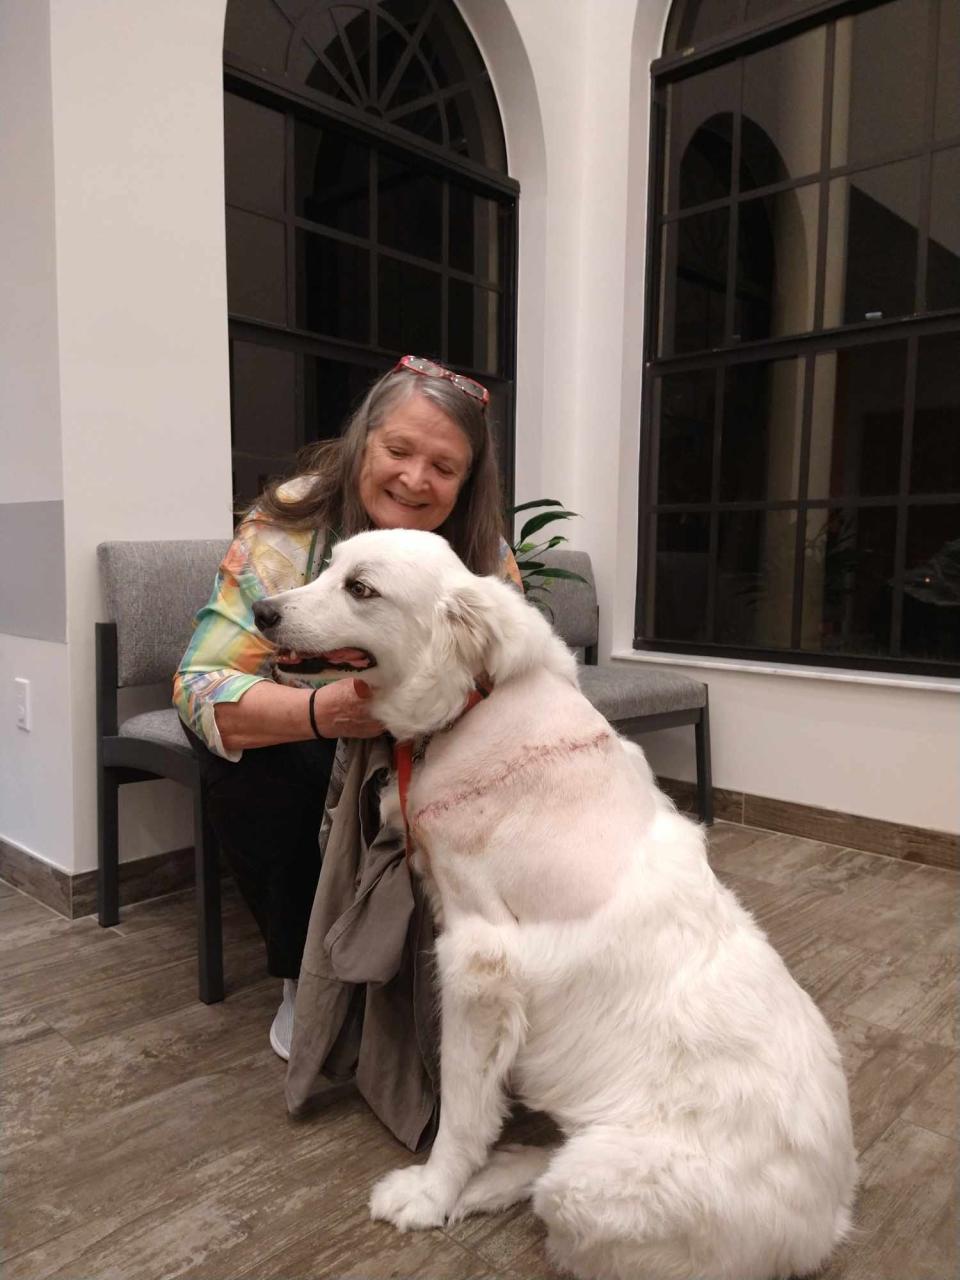 With her alligator wound closed and healing, Elsa the 115-pound Great Pyrenees is doing well says her owner Linda Busch Benson, thanks to Fetch veterinarians.